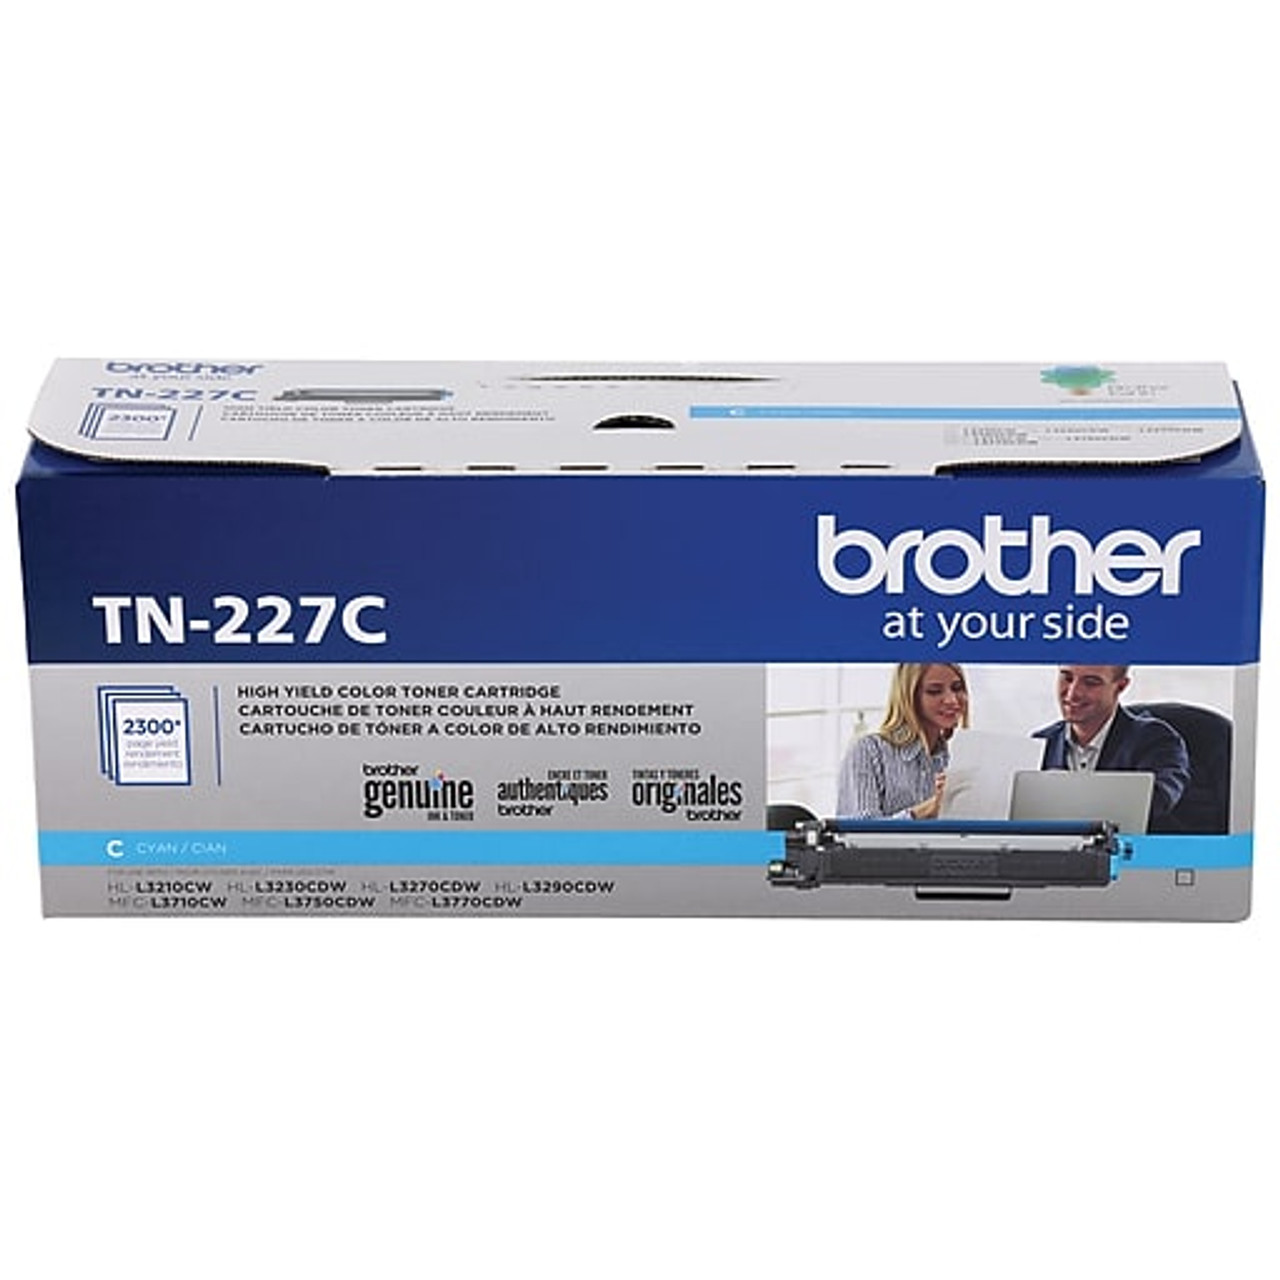 Brother MFC-L3770CDW Toner Replacement f